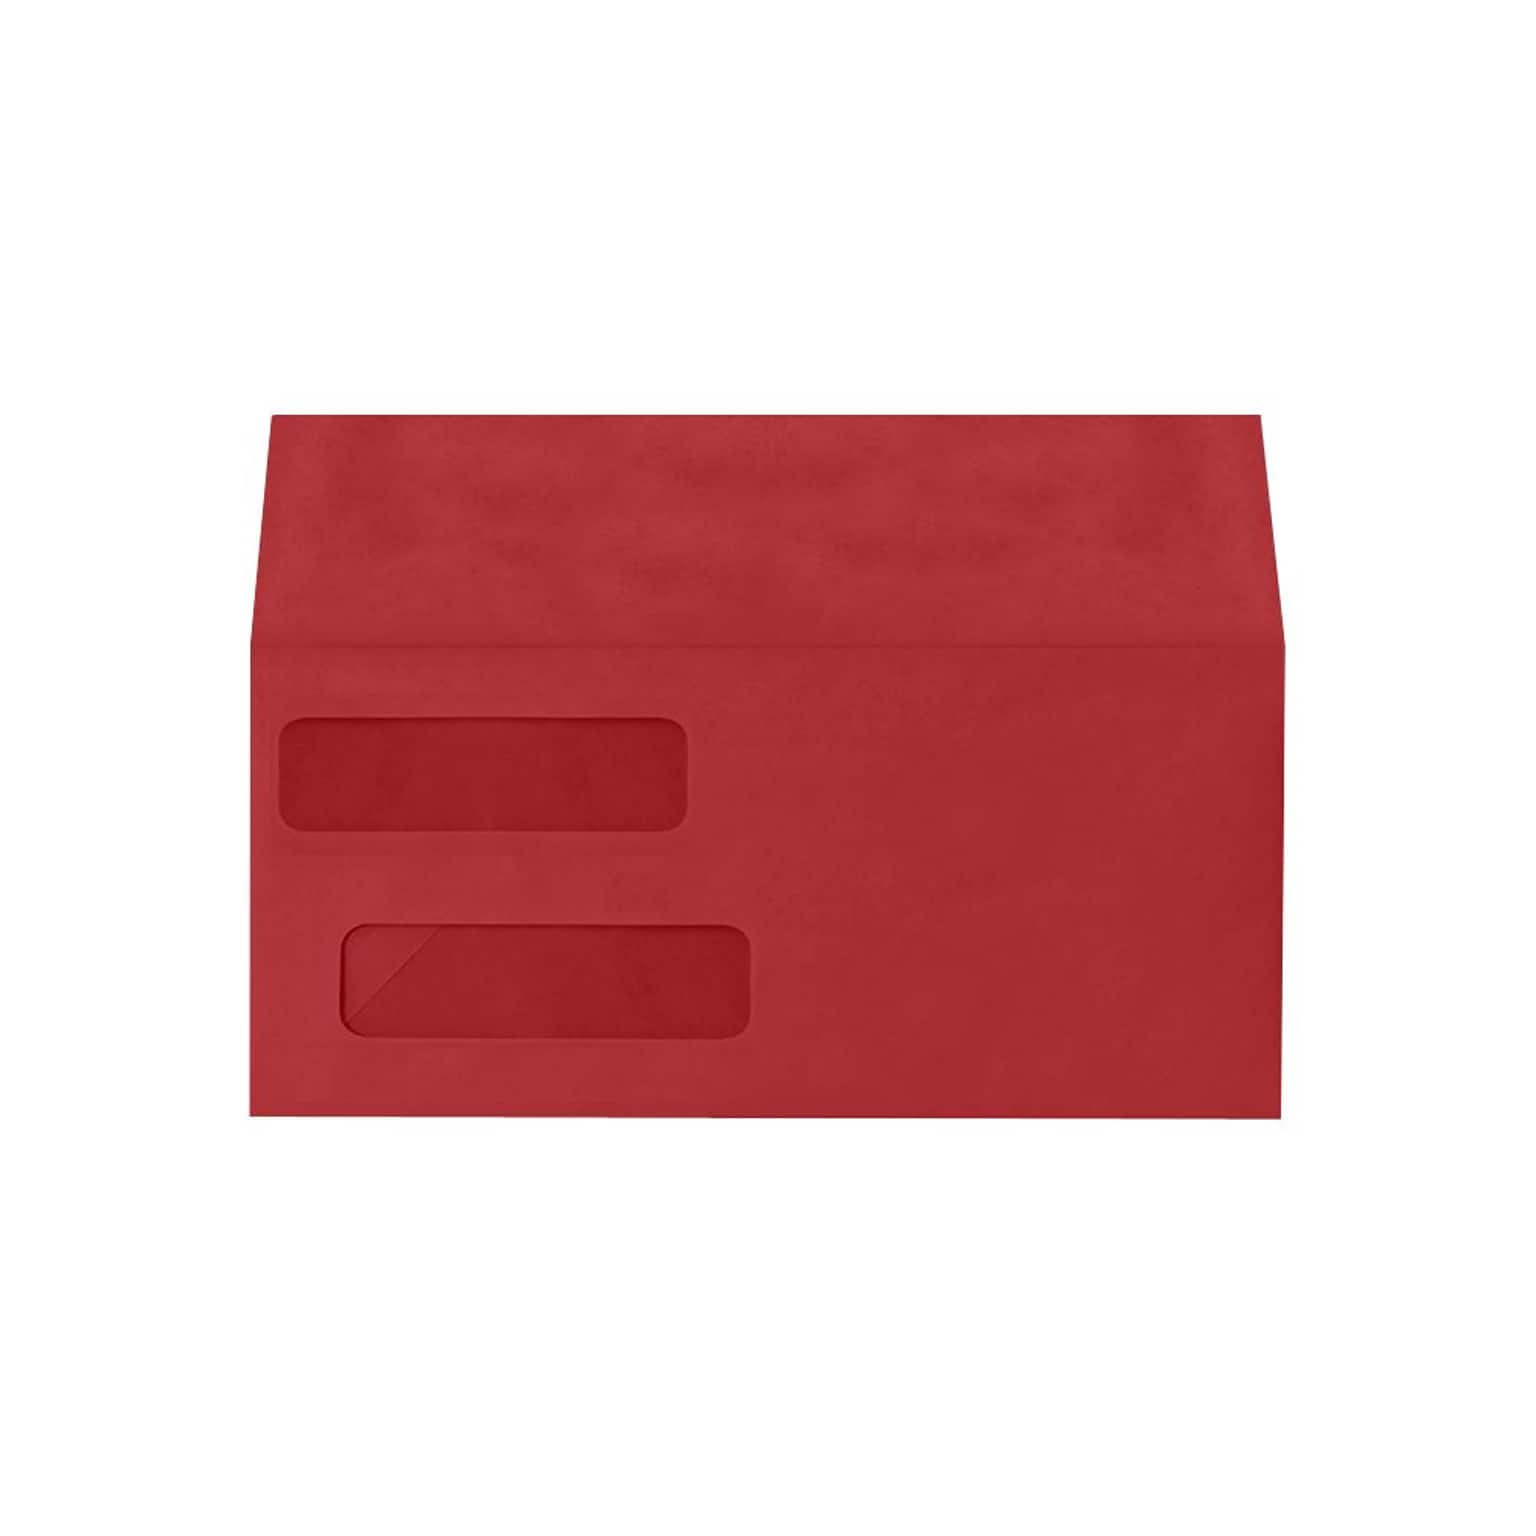 LUX Self Seal Security Tinted Double Window Envelope, 4 1/8 x 9 1/8, Ruby Red, 500/Pack (INVDW-18-500)